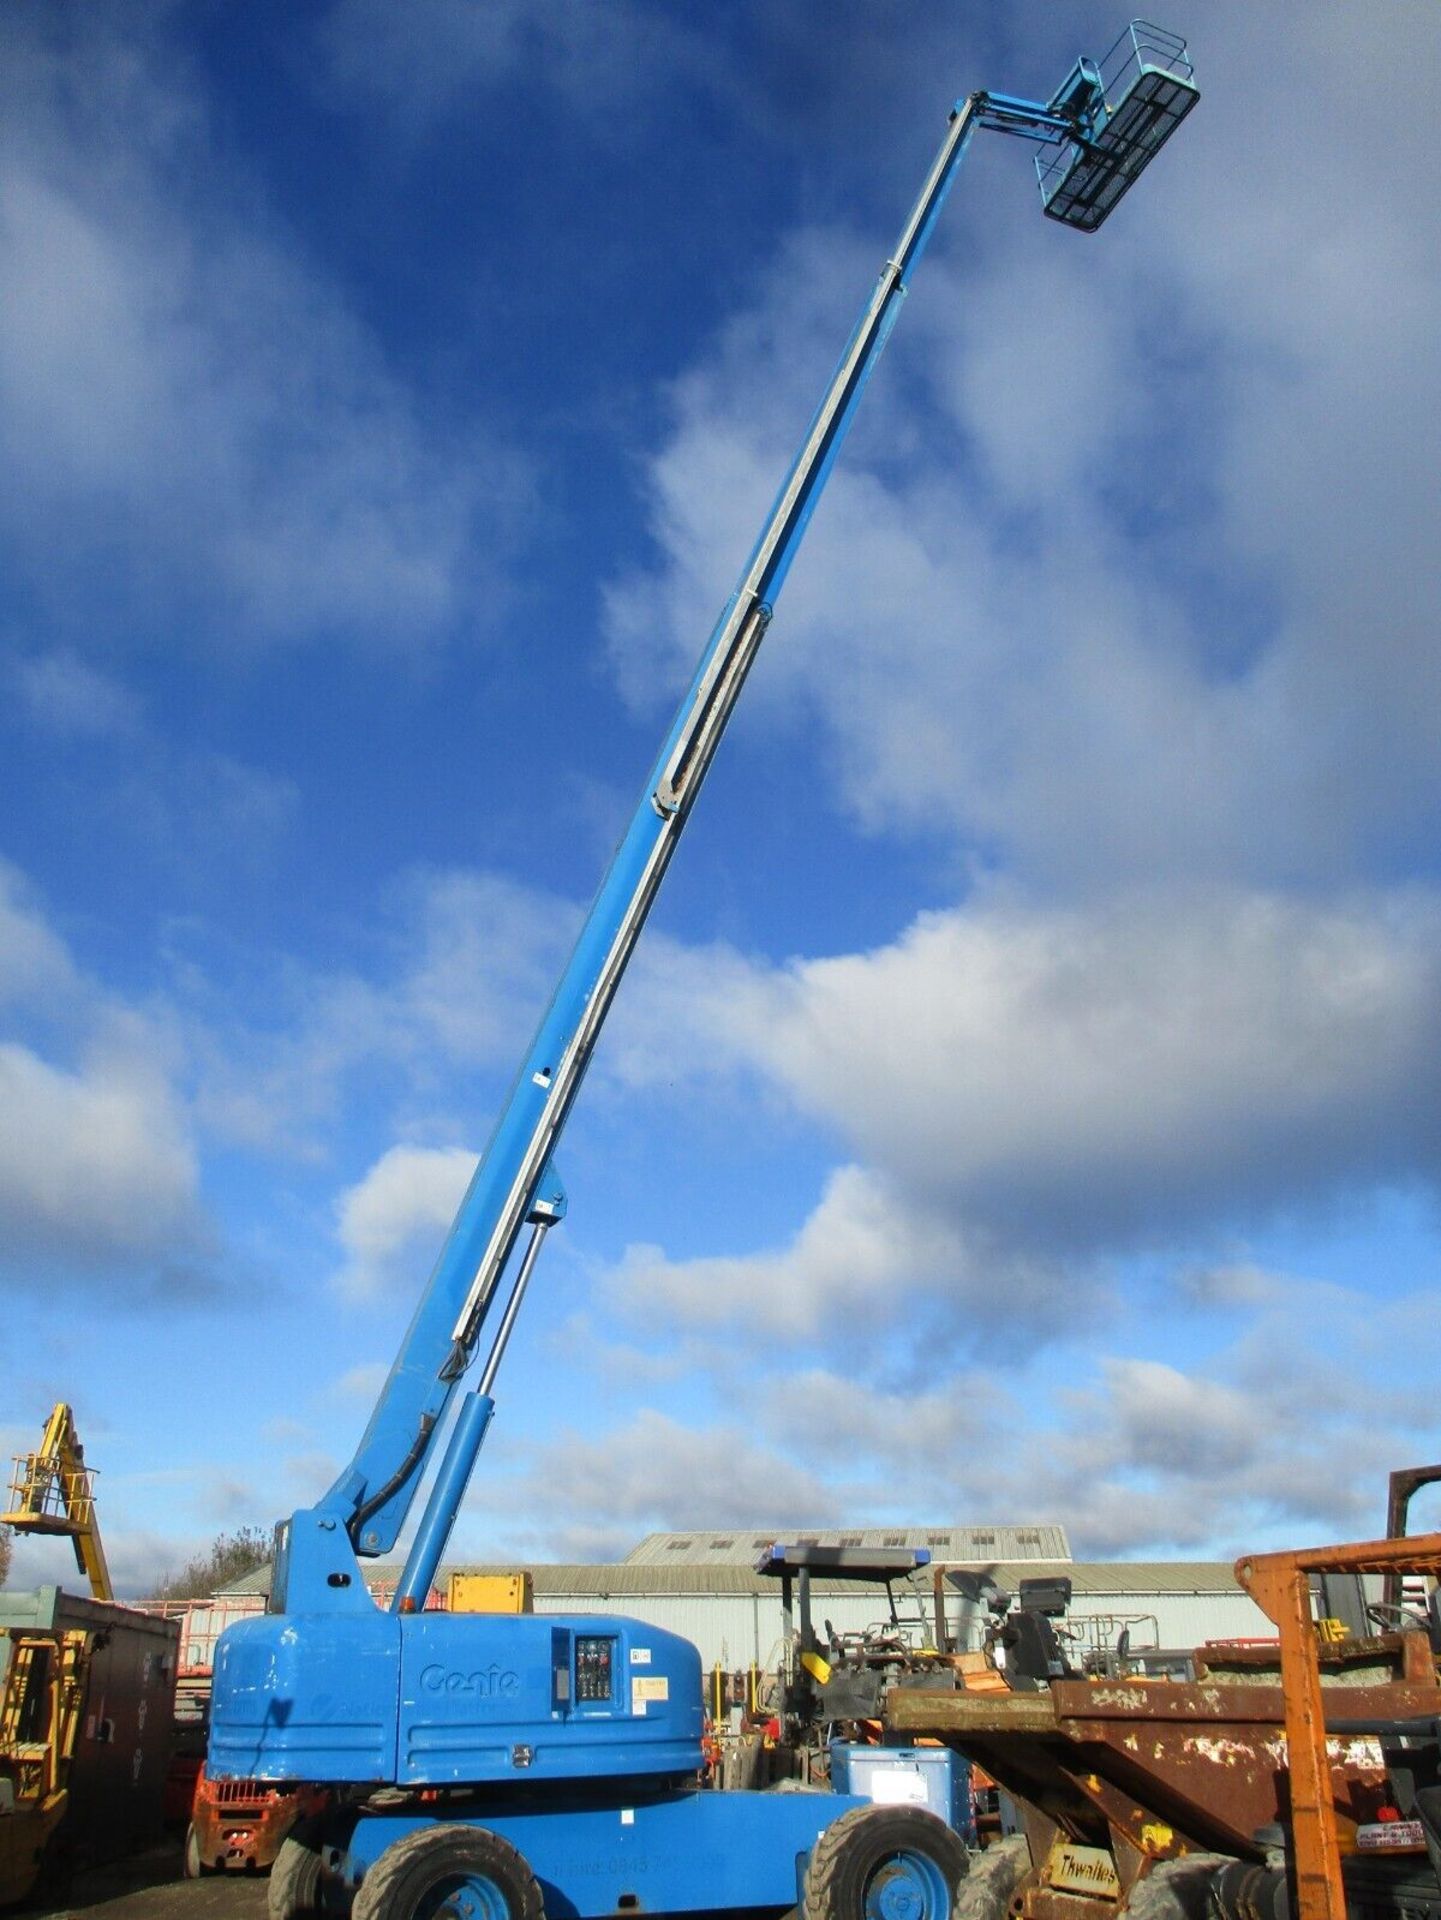 GENIE S85: SOARING HEIGHTS WITH 27.9M CHERRY PICKER - Image 12 of 13